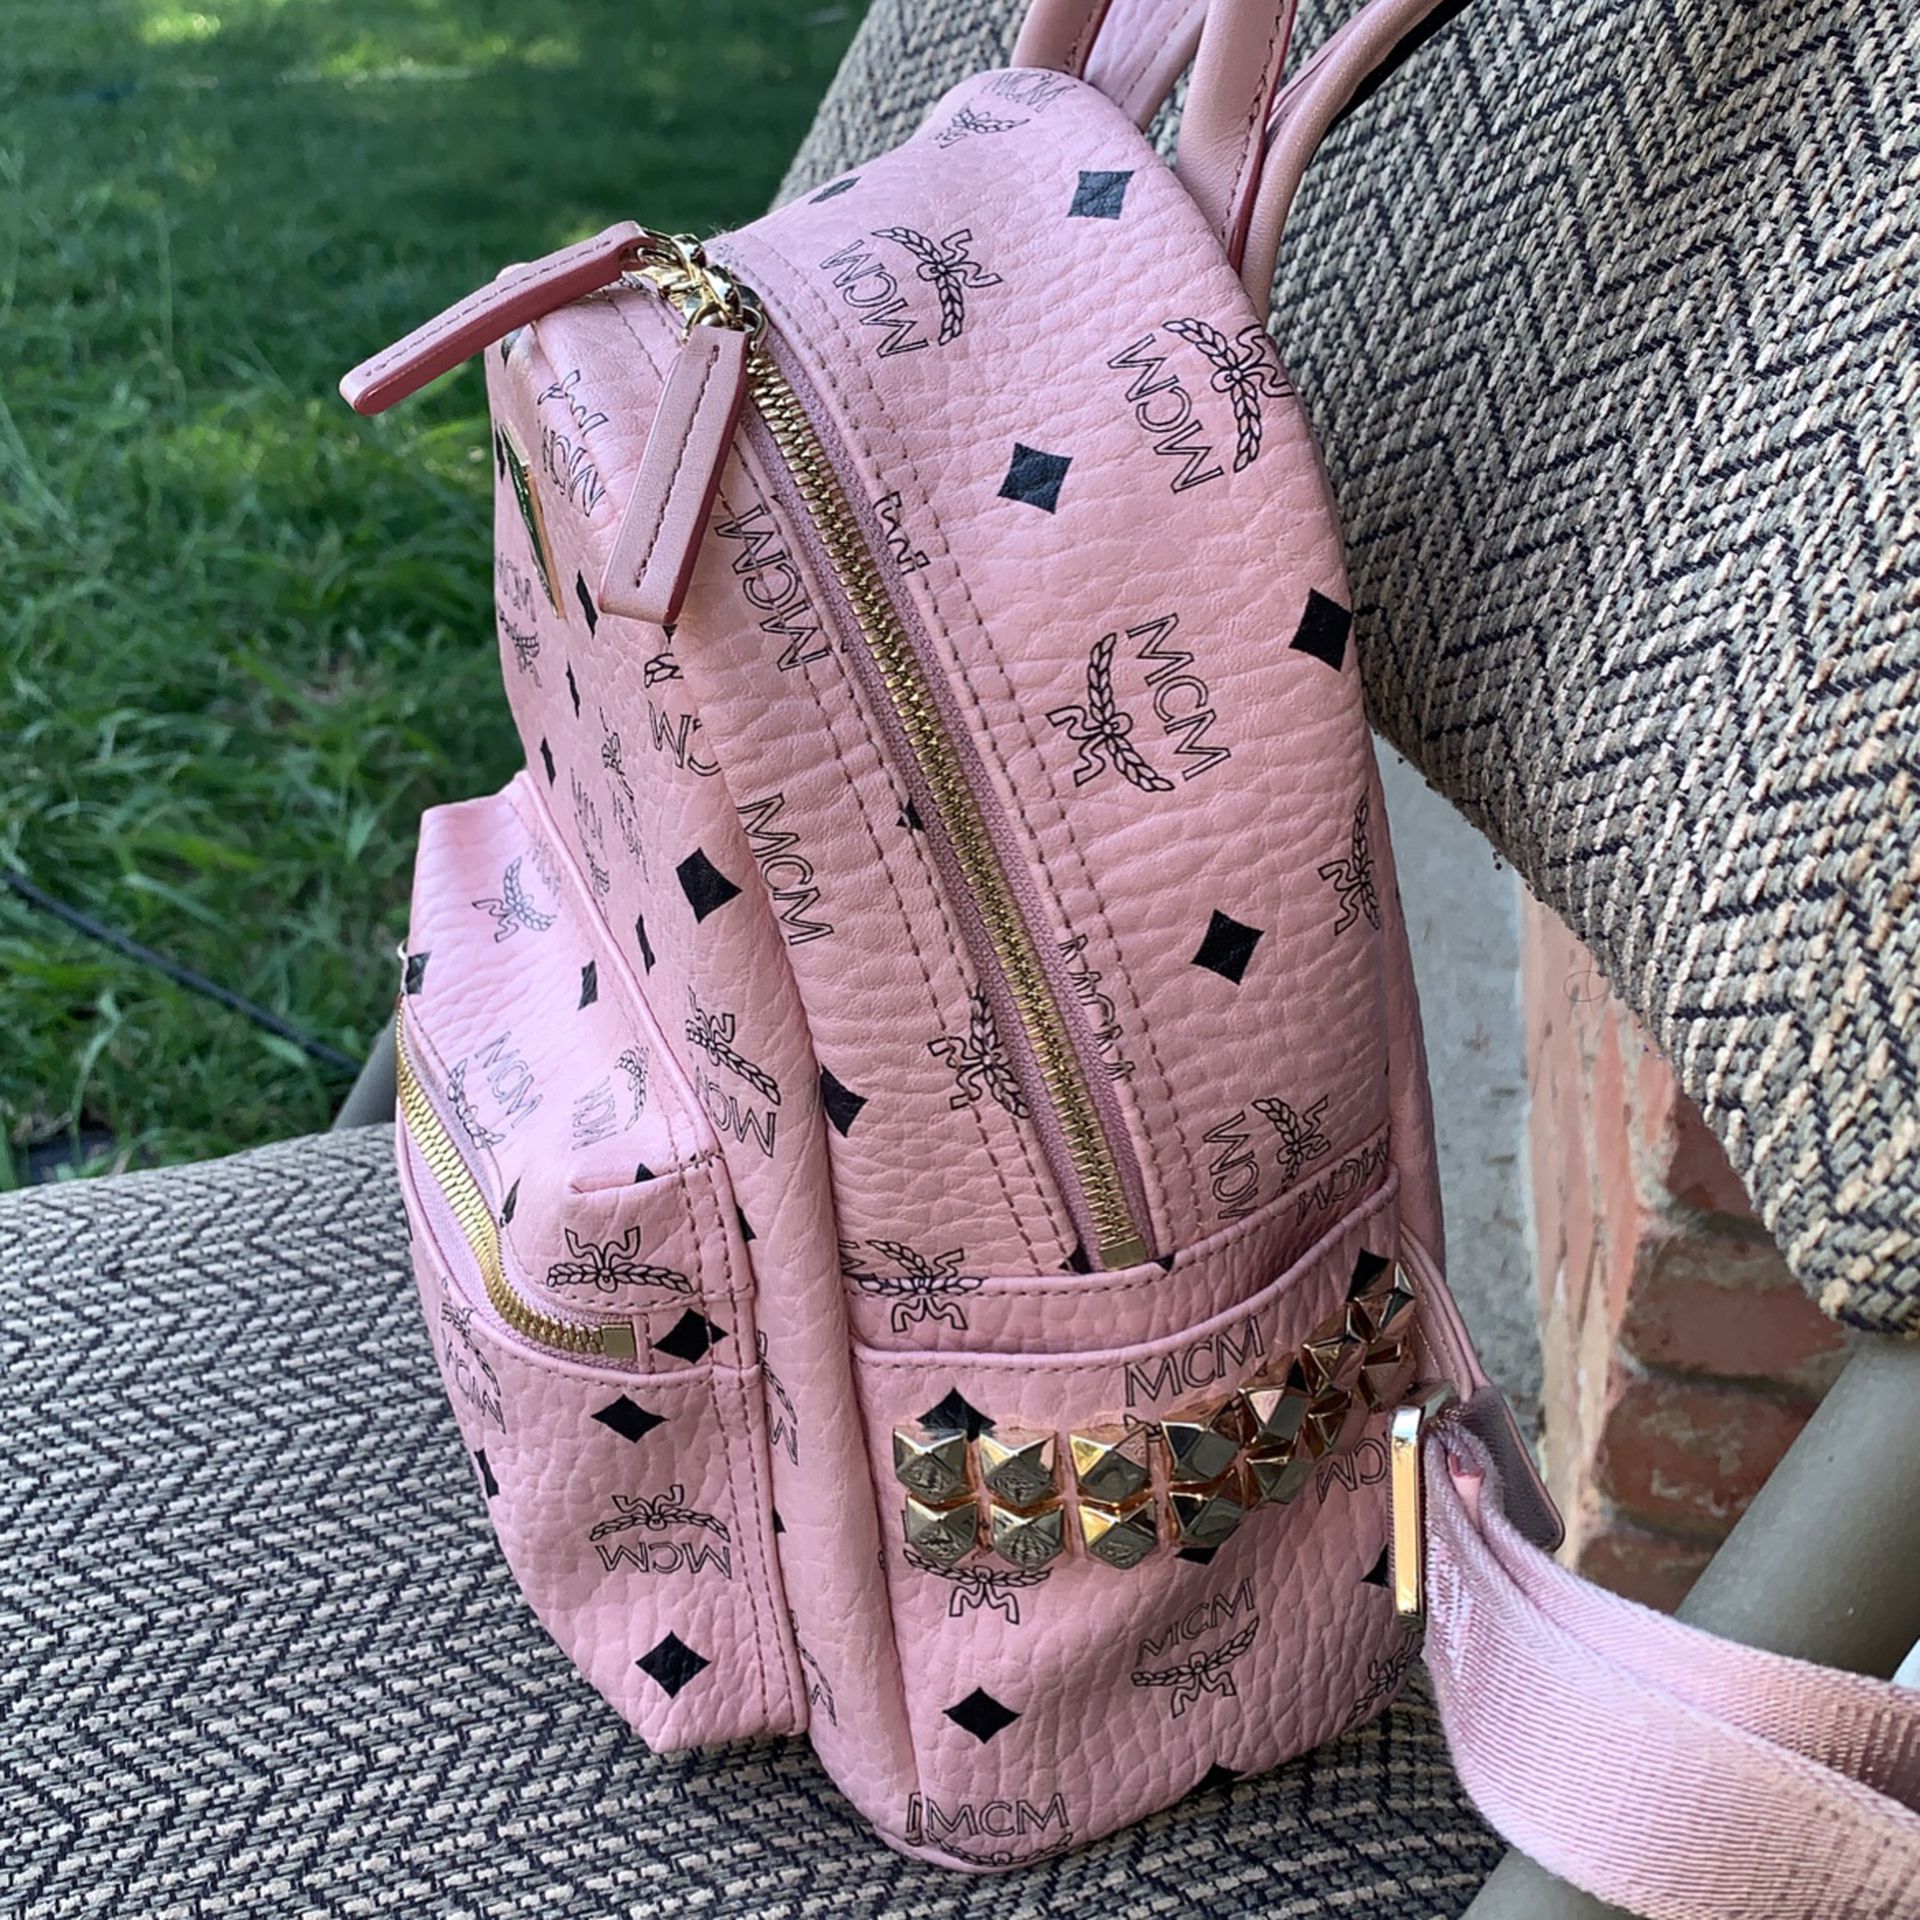 Girls Pink MCM Backpack (AUTHENTIC) for Sale in Linda, CA - OfferUp